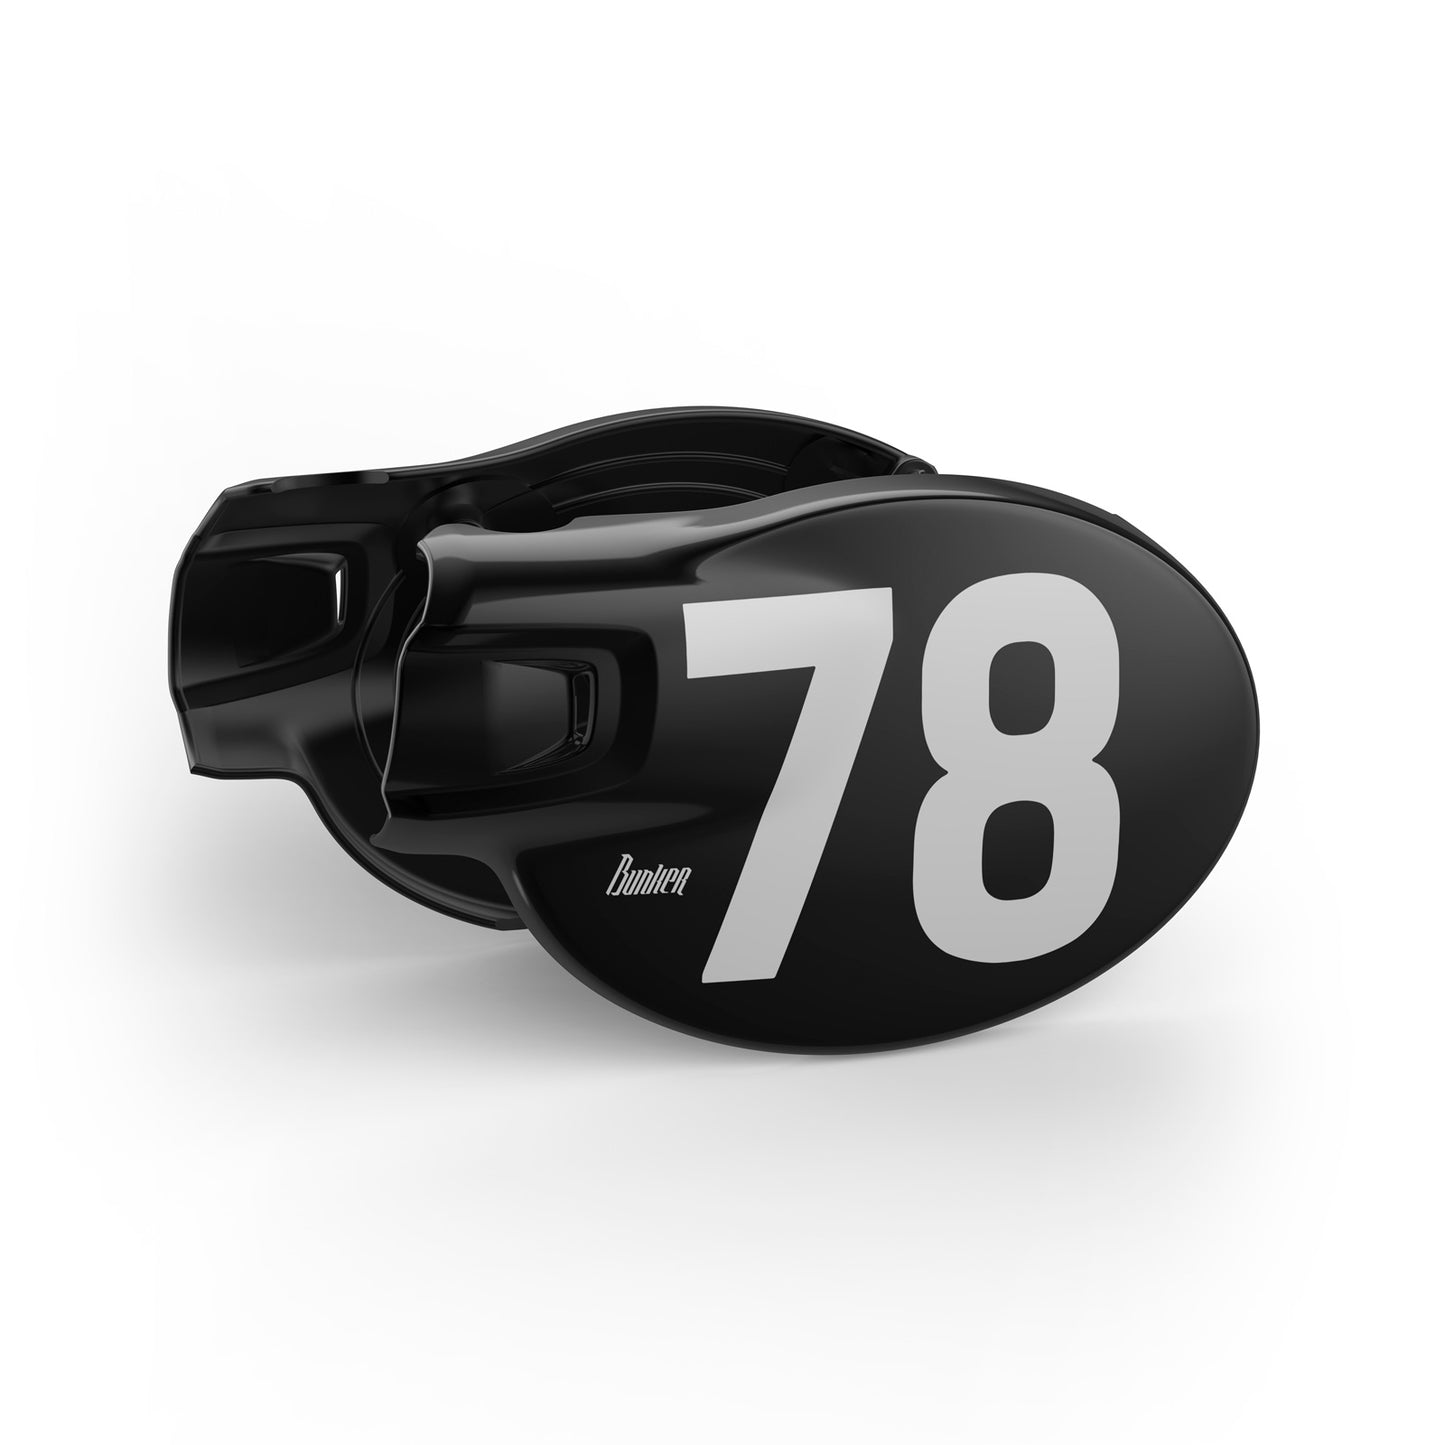 Triumph  Street Twin, Street Cup, Speed Twin900  Racing Number  PA12  Number Plate  Number  Covers  Black  2021-ON